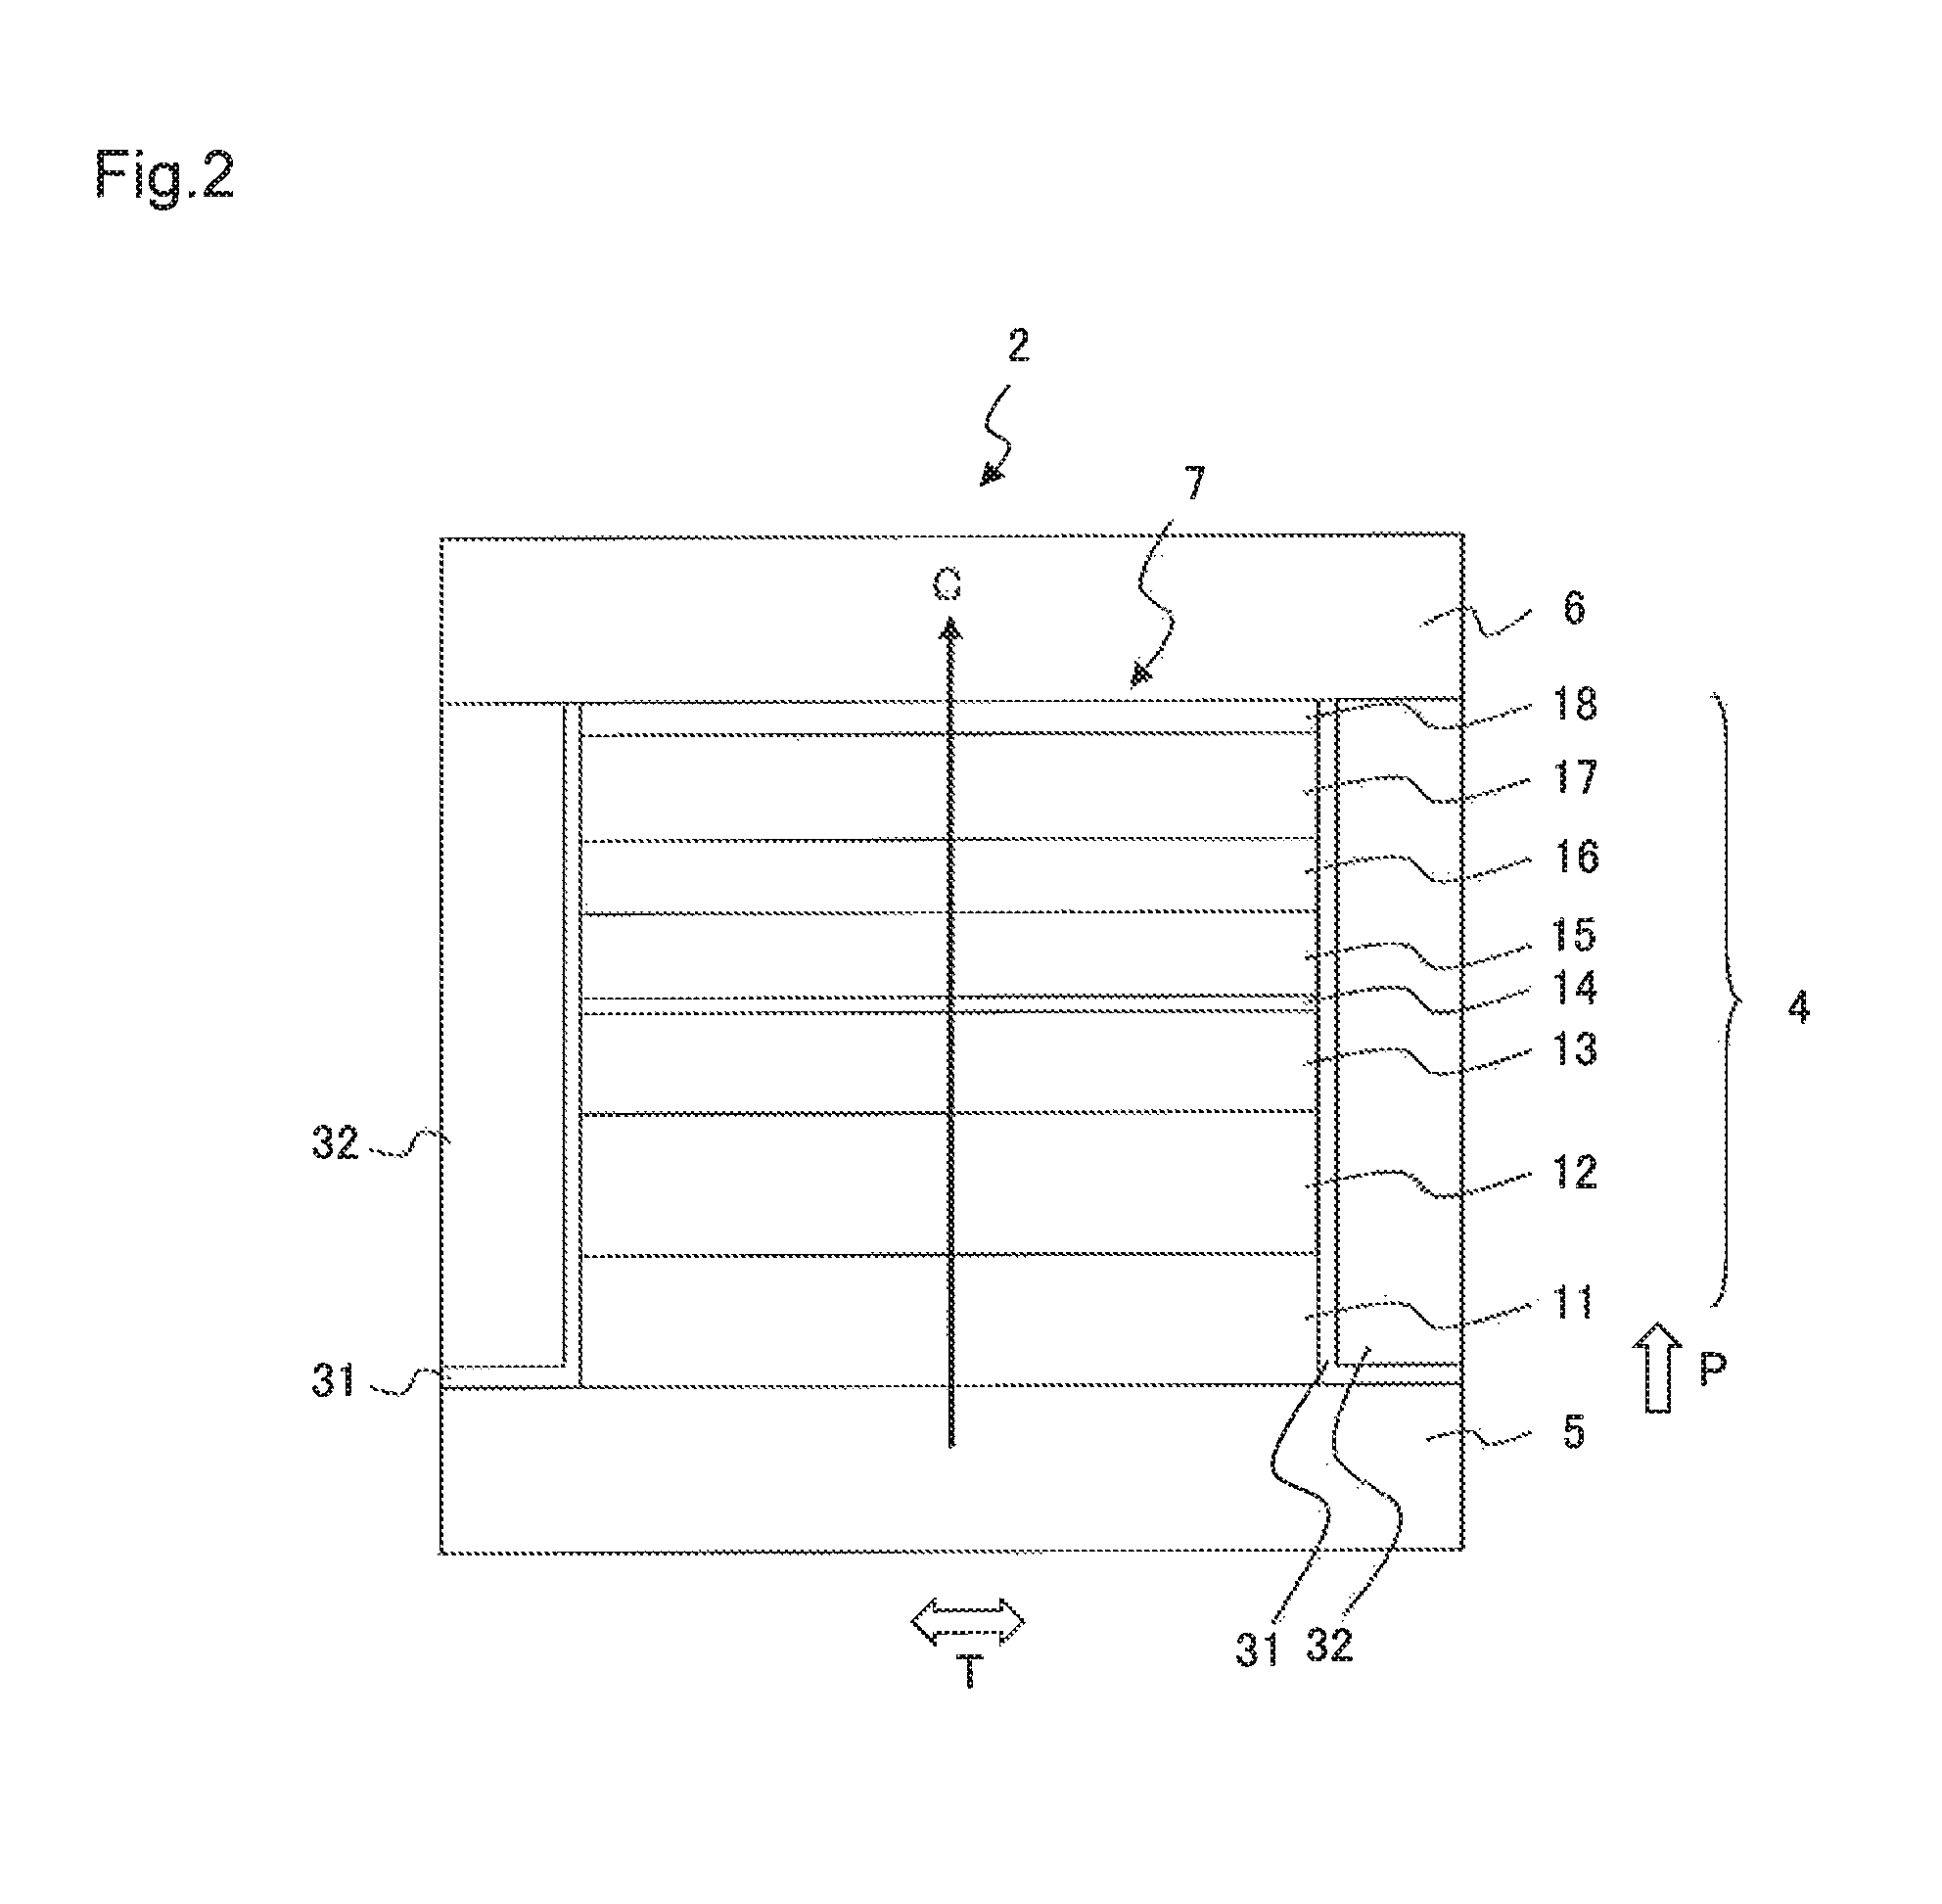 Magneto-resistive effect element having FePt bias magnetic field application layer with Pt seed layer and MgO insulation layer